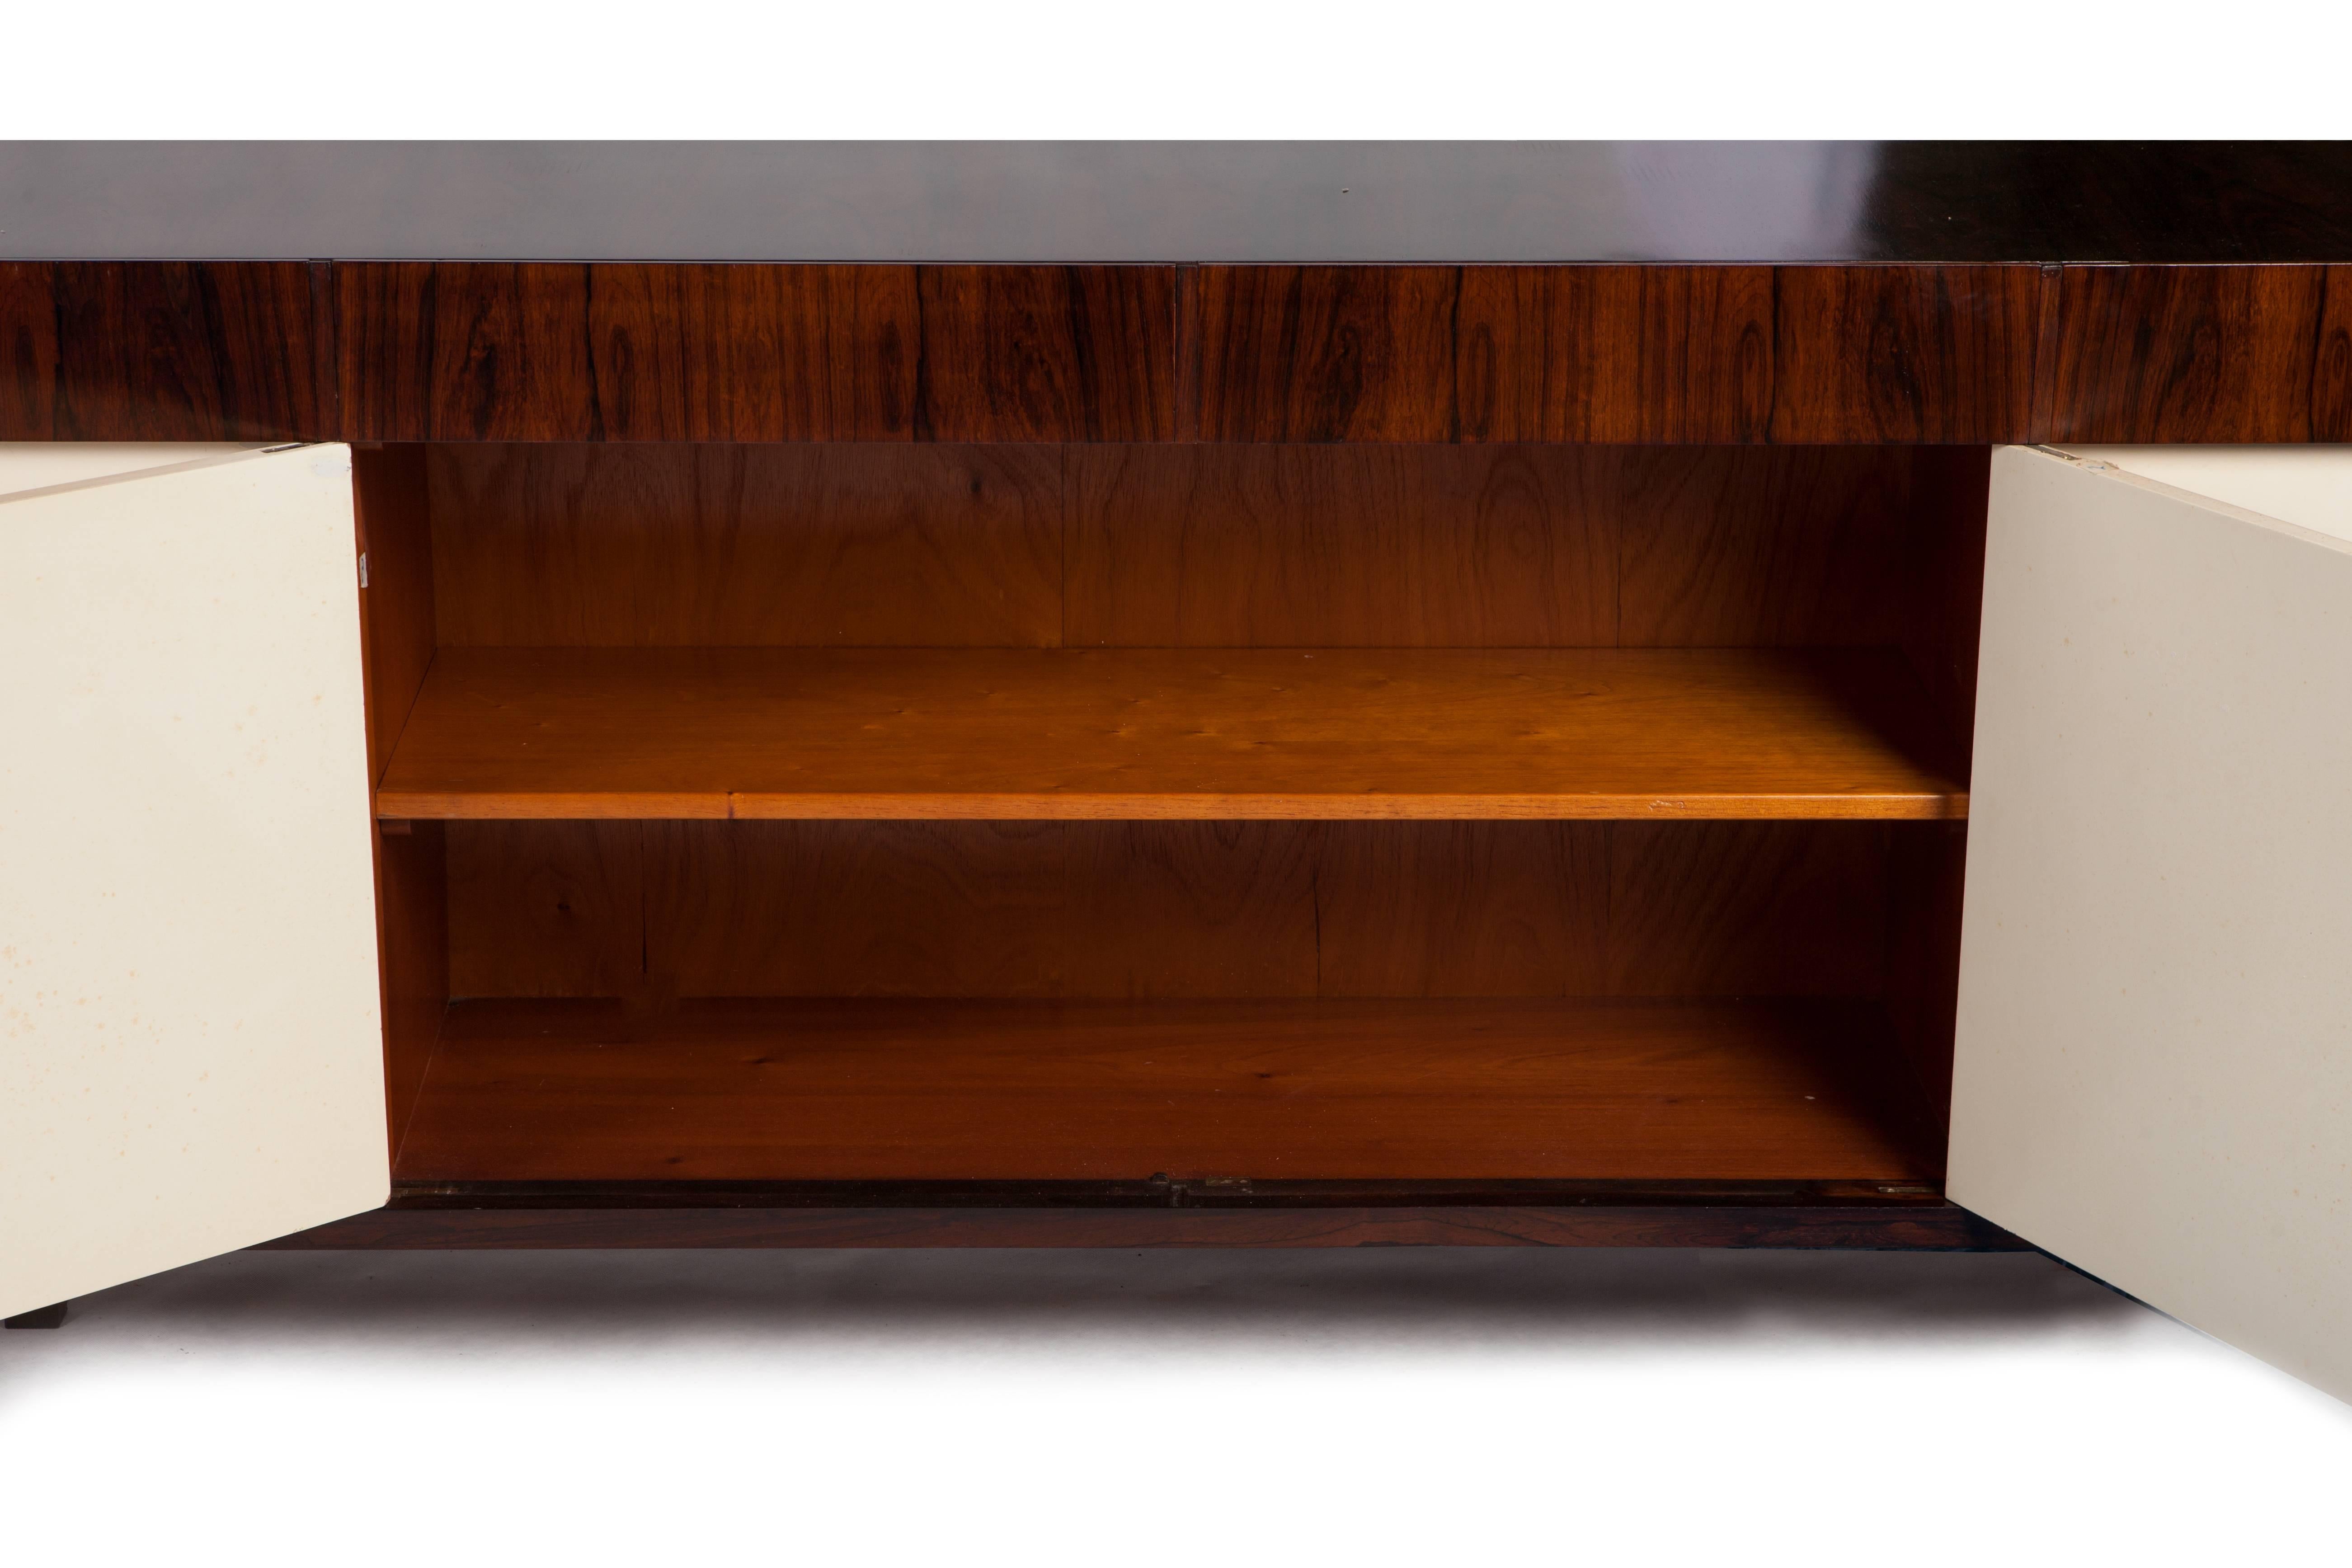 This monumental 13-foot Brazilian modern rosewood (Jacaranda) cabinet-buffet was a privately commissioned piece designed by Joaquim Tenreiro.